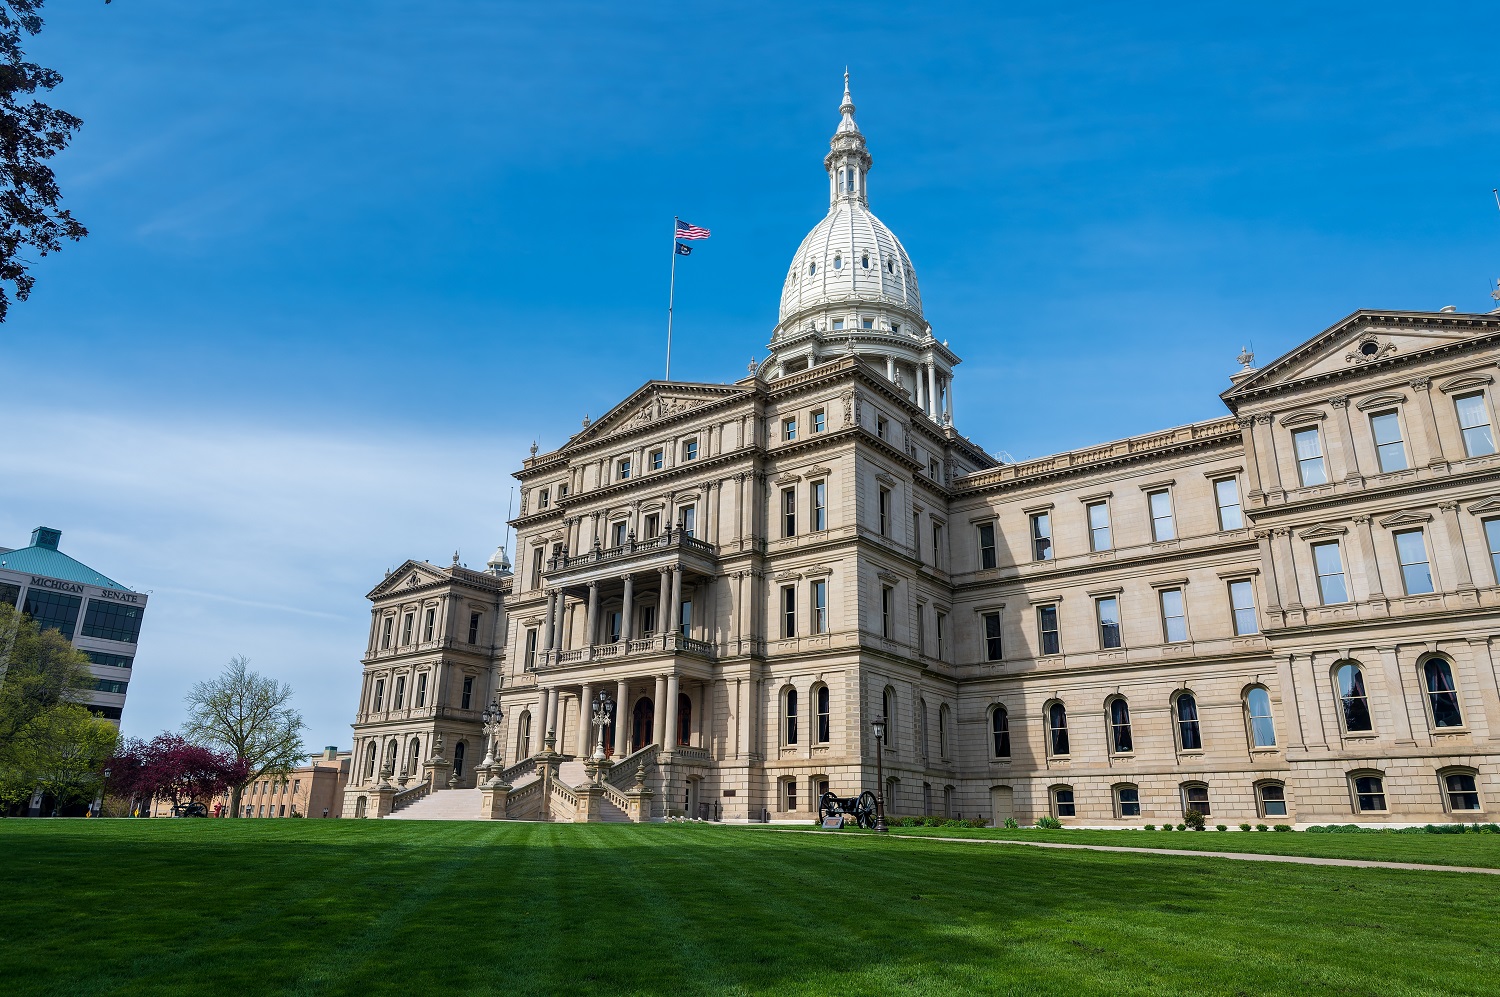 Some Michigan districts are not equitably funding schools with higher needs: view of Michigan capitol building from the front lawn with blue sky